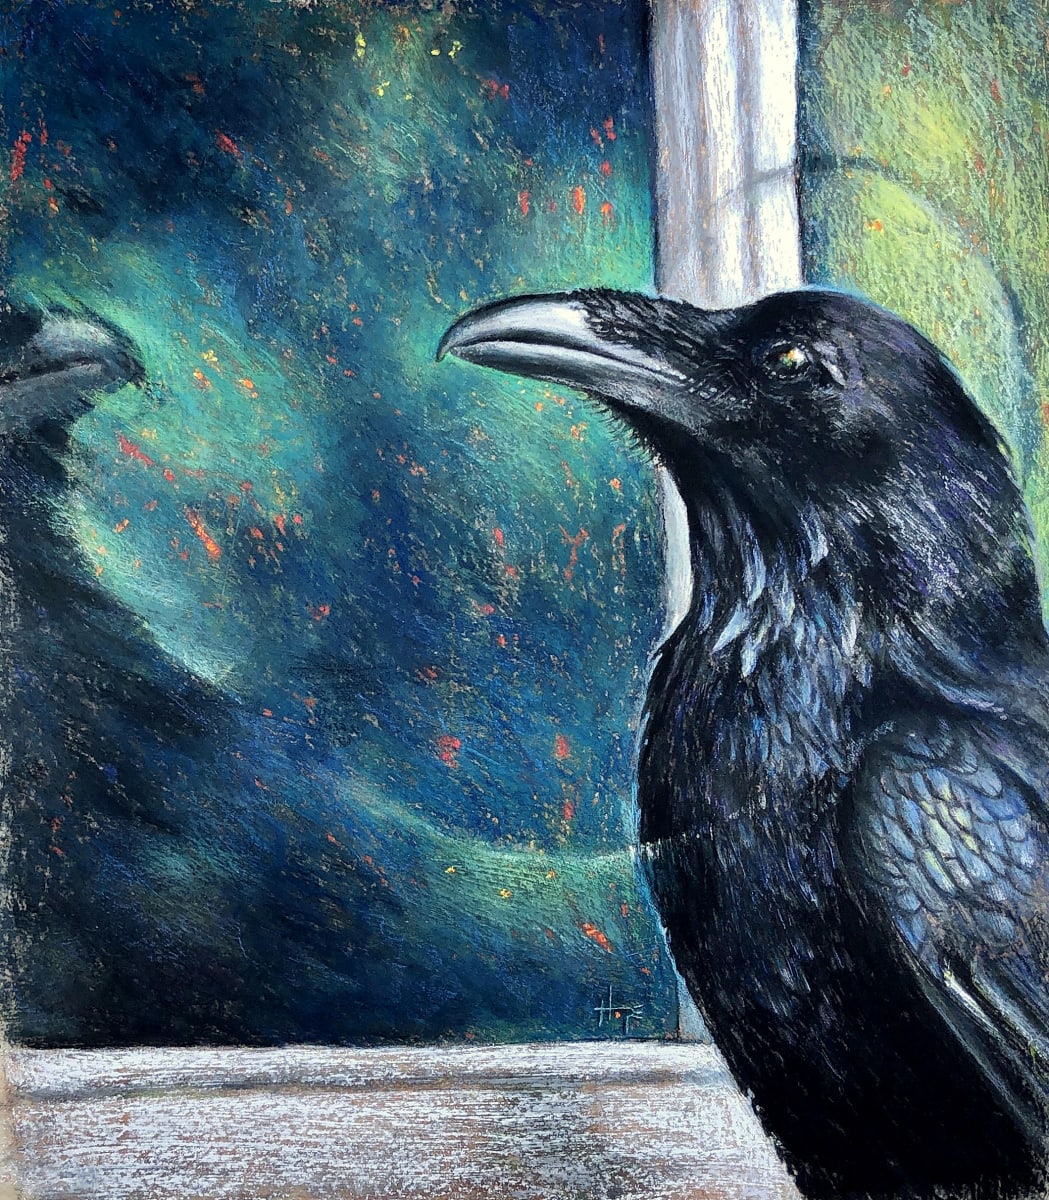 Two. For Mirth.  Image: A raven admiring its reflection in a window